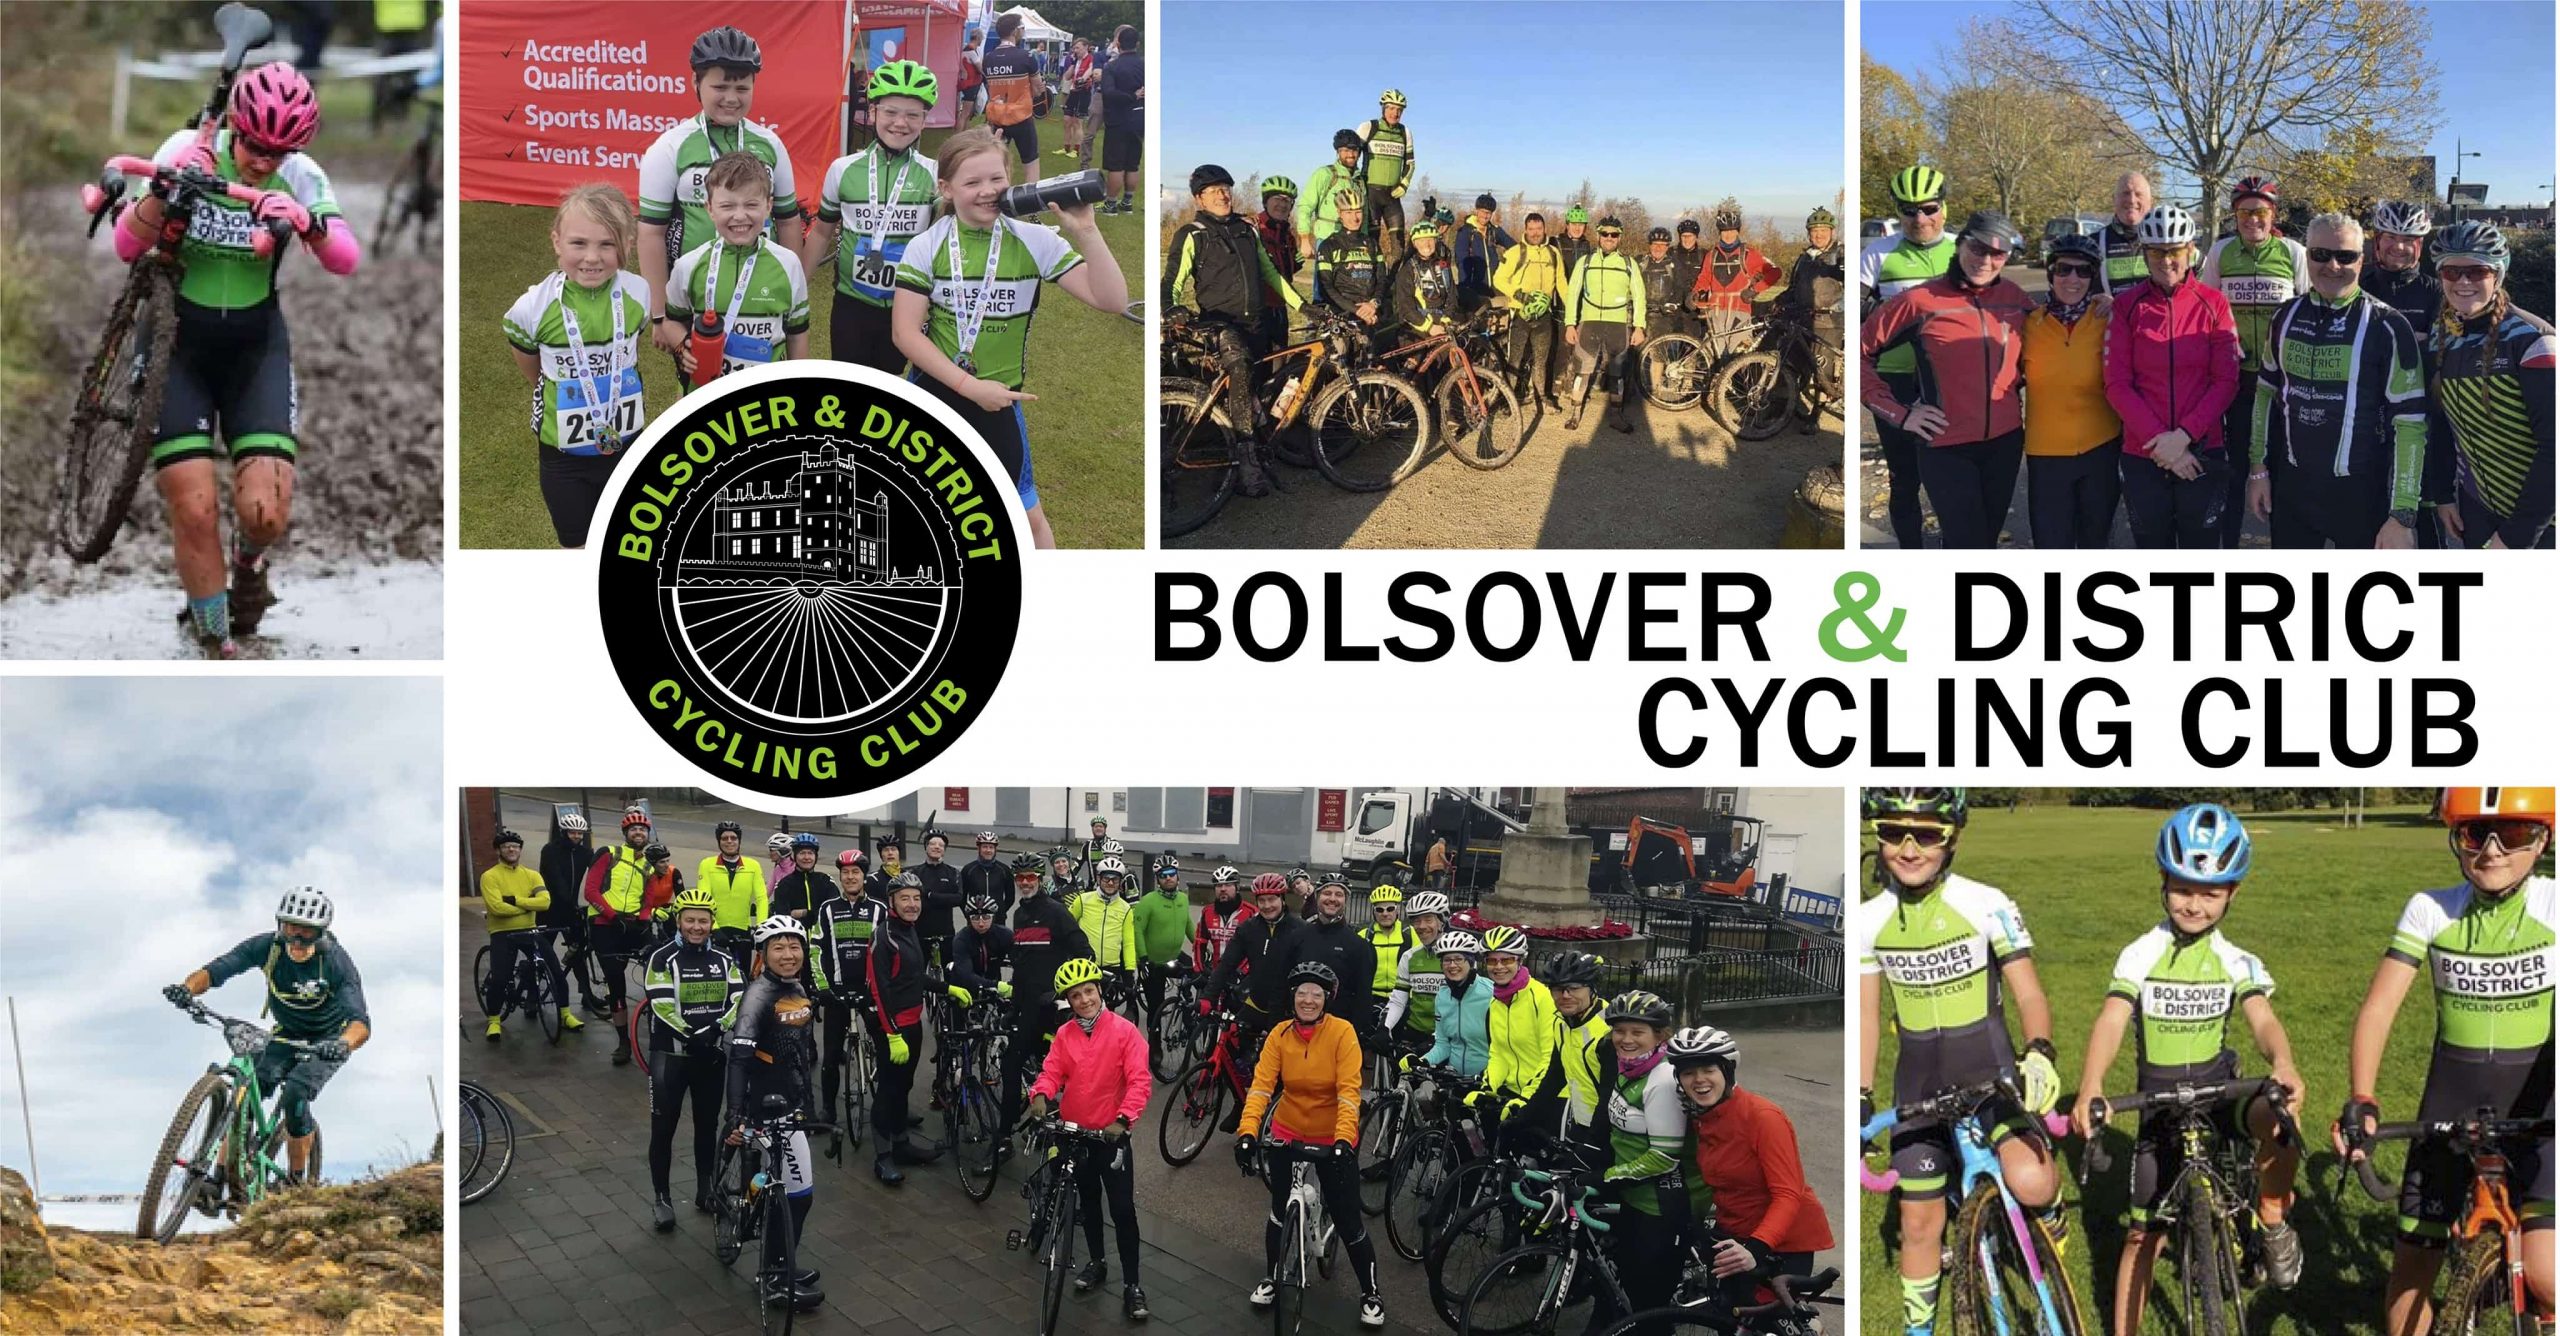 Bolsover and District Cycling Club - A Cycling Club For Everyone